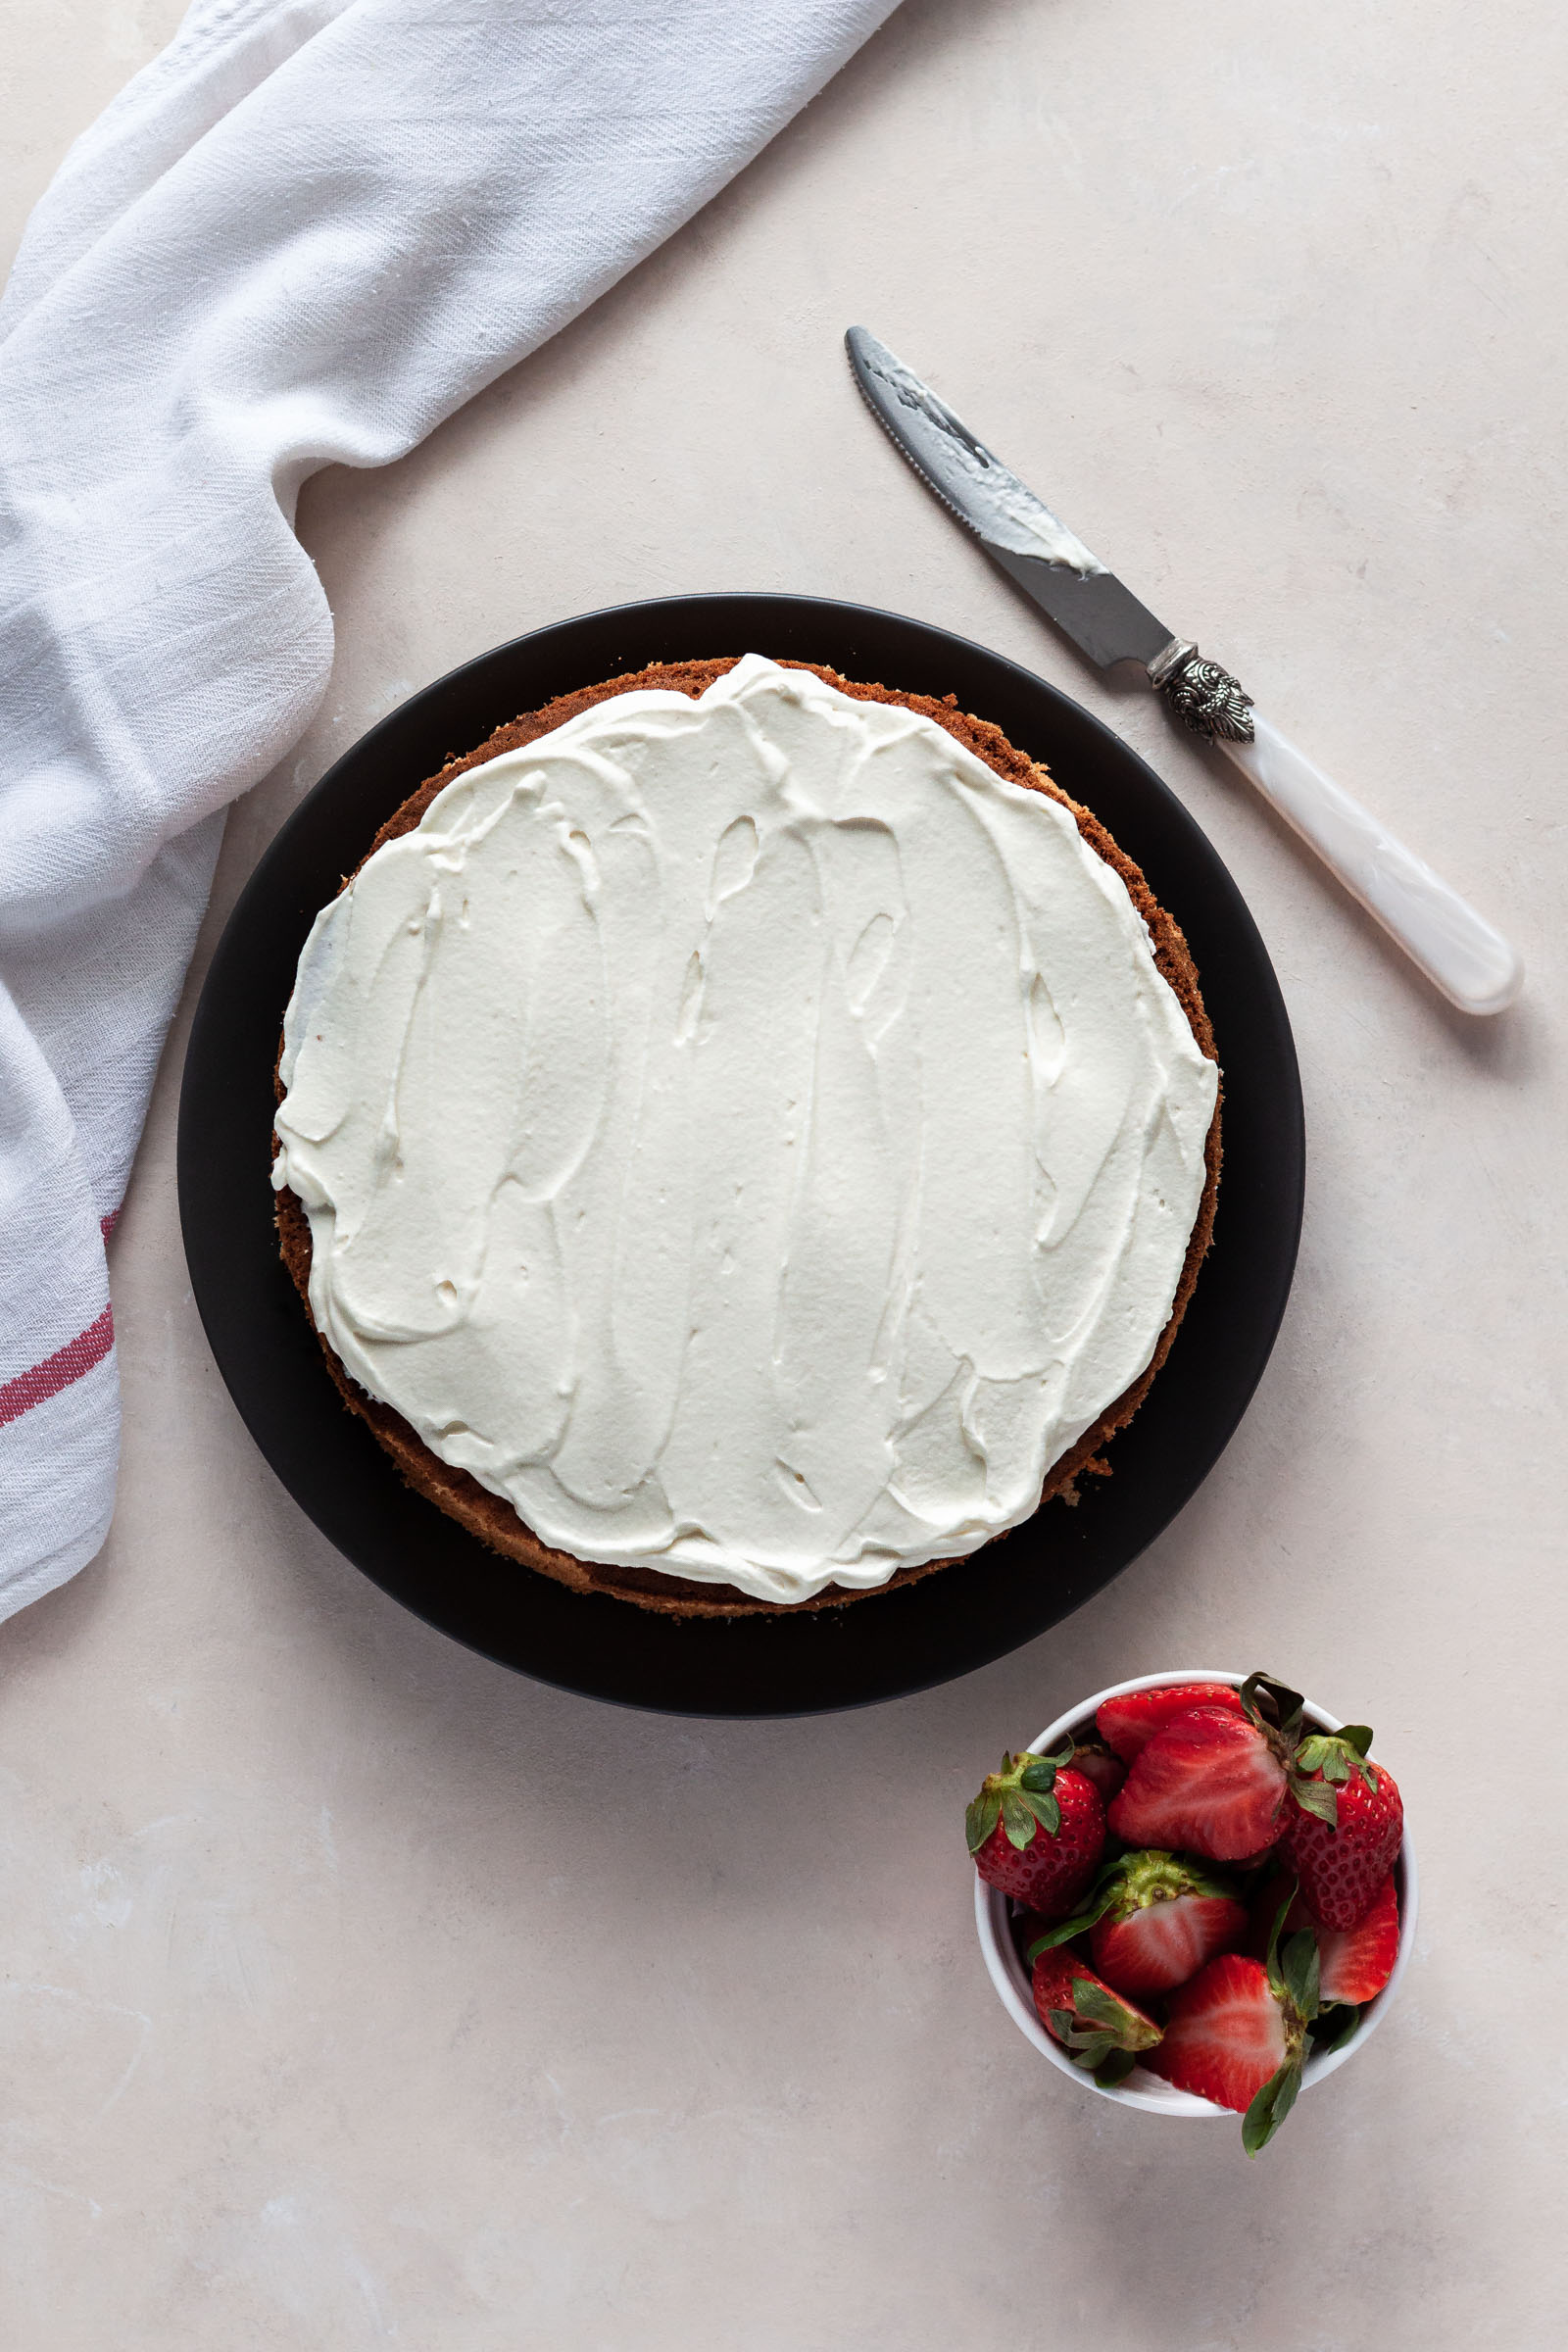 Sponge cake decorated with mascarpone cream,with fresh strawberries and a knife on the side.